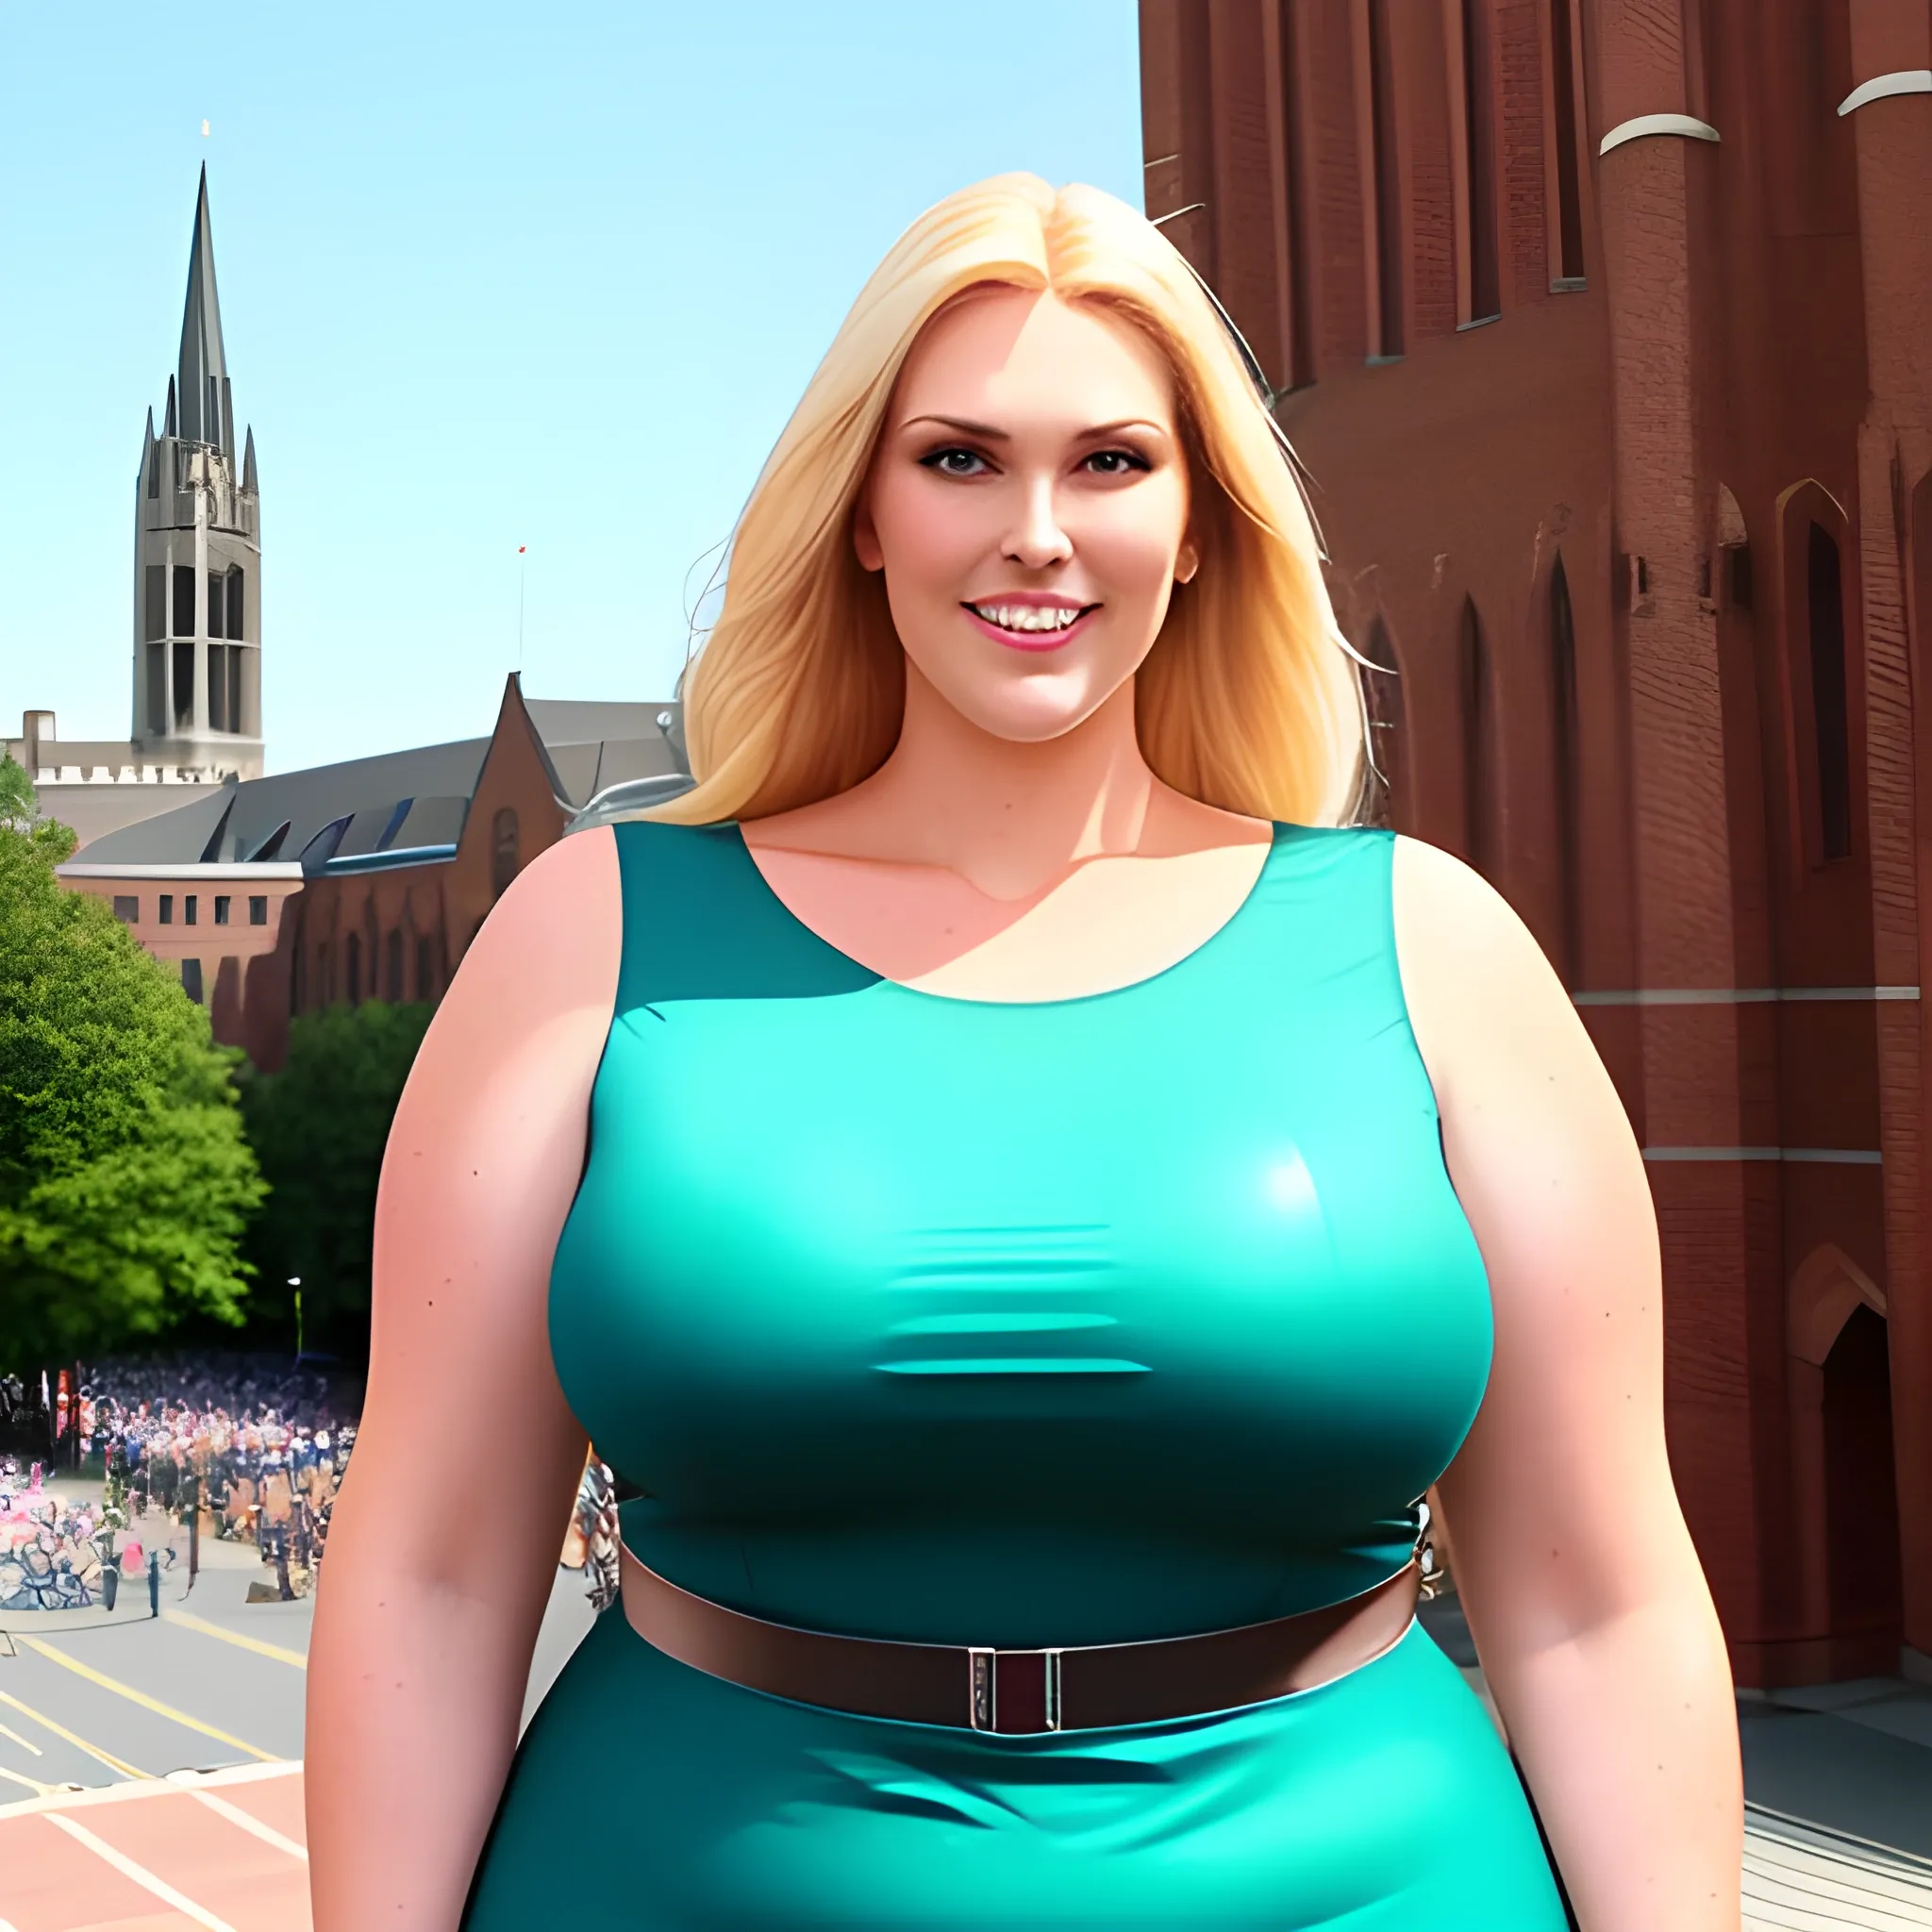 huge and very tall friendly blonde plus size girl with small head and broad shoulders, not curvy but massive, on busy schoolyard towerring among other students and teachers